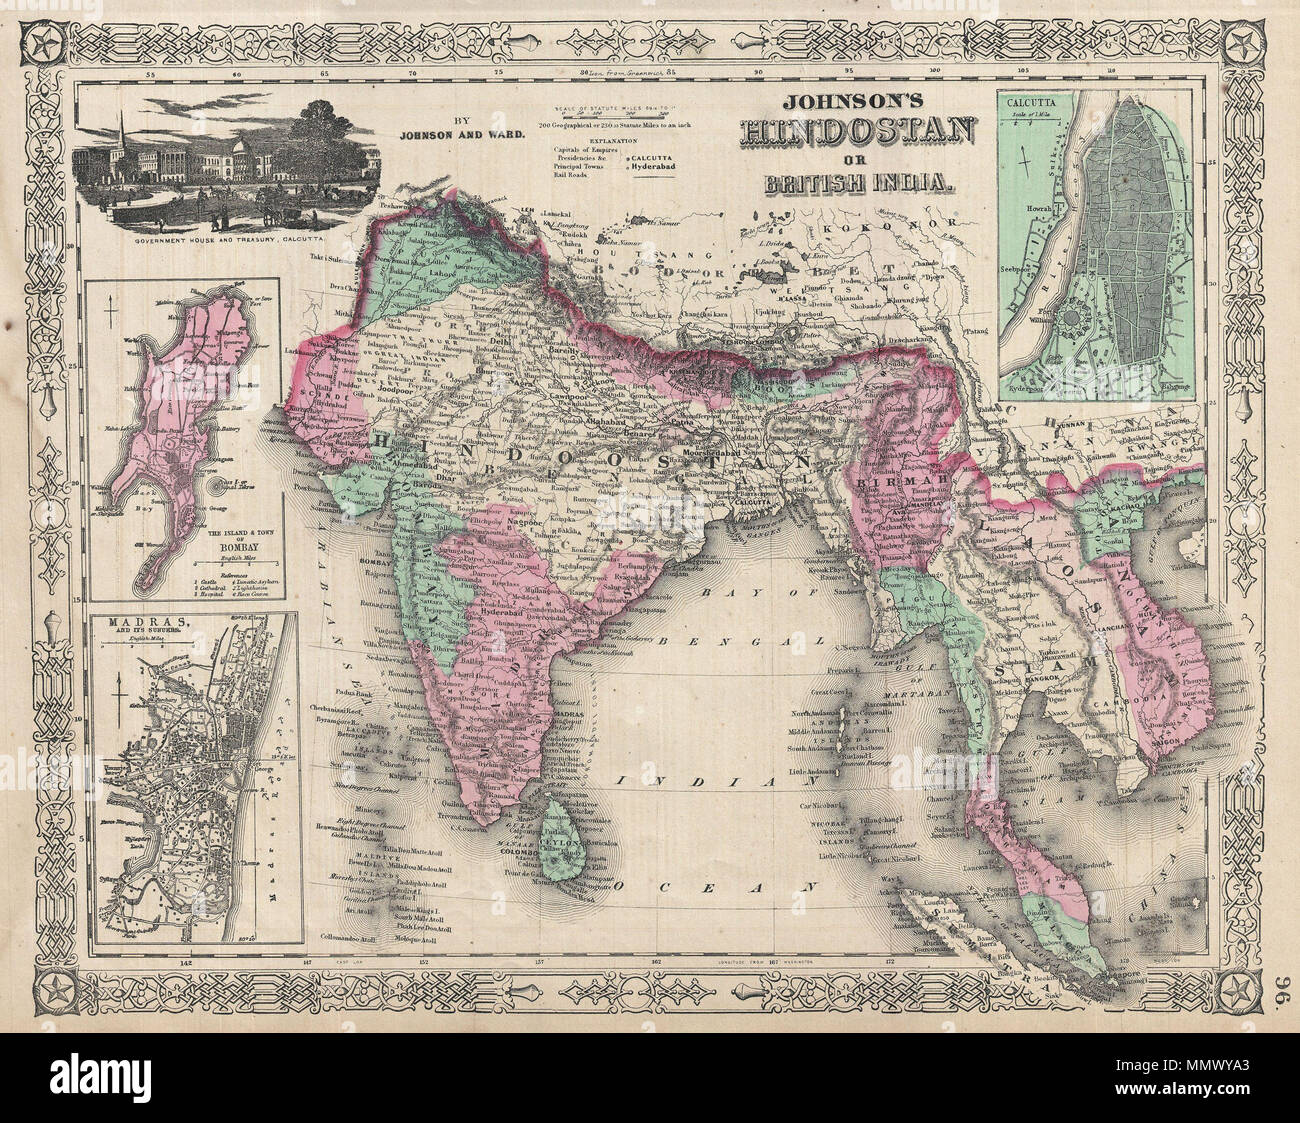 .  English: A very nice example of A. J. Johnson’s 1865 map of India and Southeast Asia. Covers from the Indus River eastward to include all of India, Burma, Siam (Thailand), Laos, Cambodia, Malaysia (Malacca) and Vietnam (Tonquin and Chochin). Also includes parts of Pakistan, Nepal, China, Bhutan, Sumatra and Ceylon (Sri Lanka). Offers color coding according to country and region as well as notations regarding roadways, cities, towns, and river systems. Three inset maps focus on the Island of Bombay (Mumbai), Madras, and Calcutta. An view of the Government House and Treasury in Calcutta adorn Stock Photo